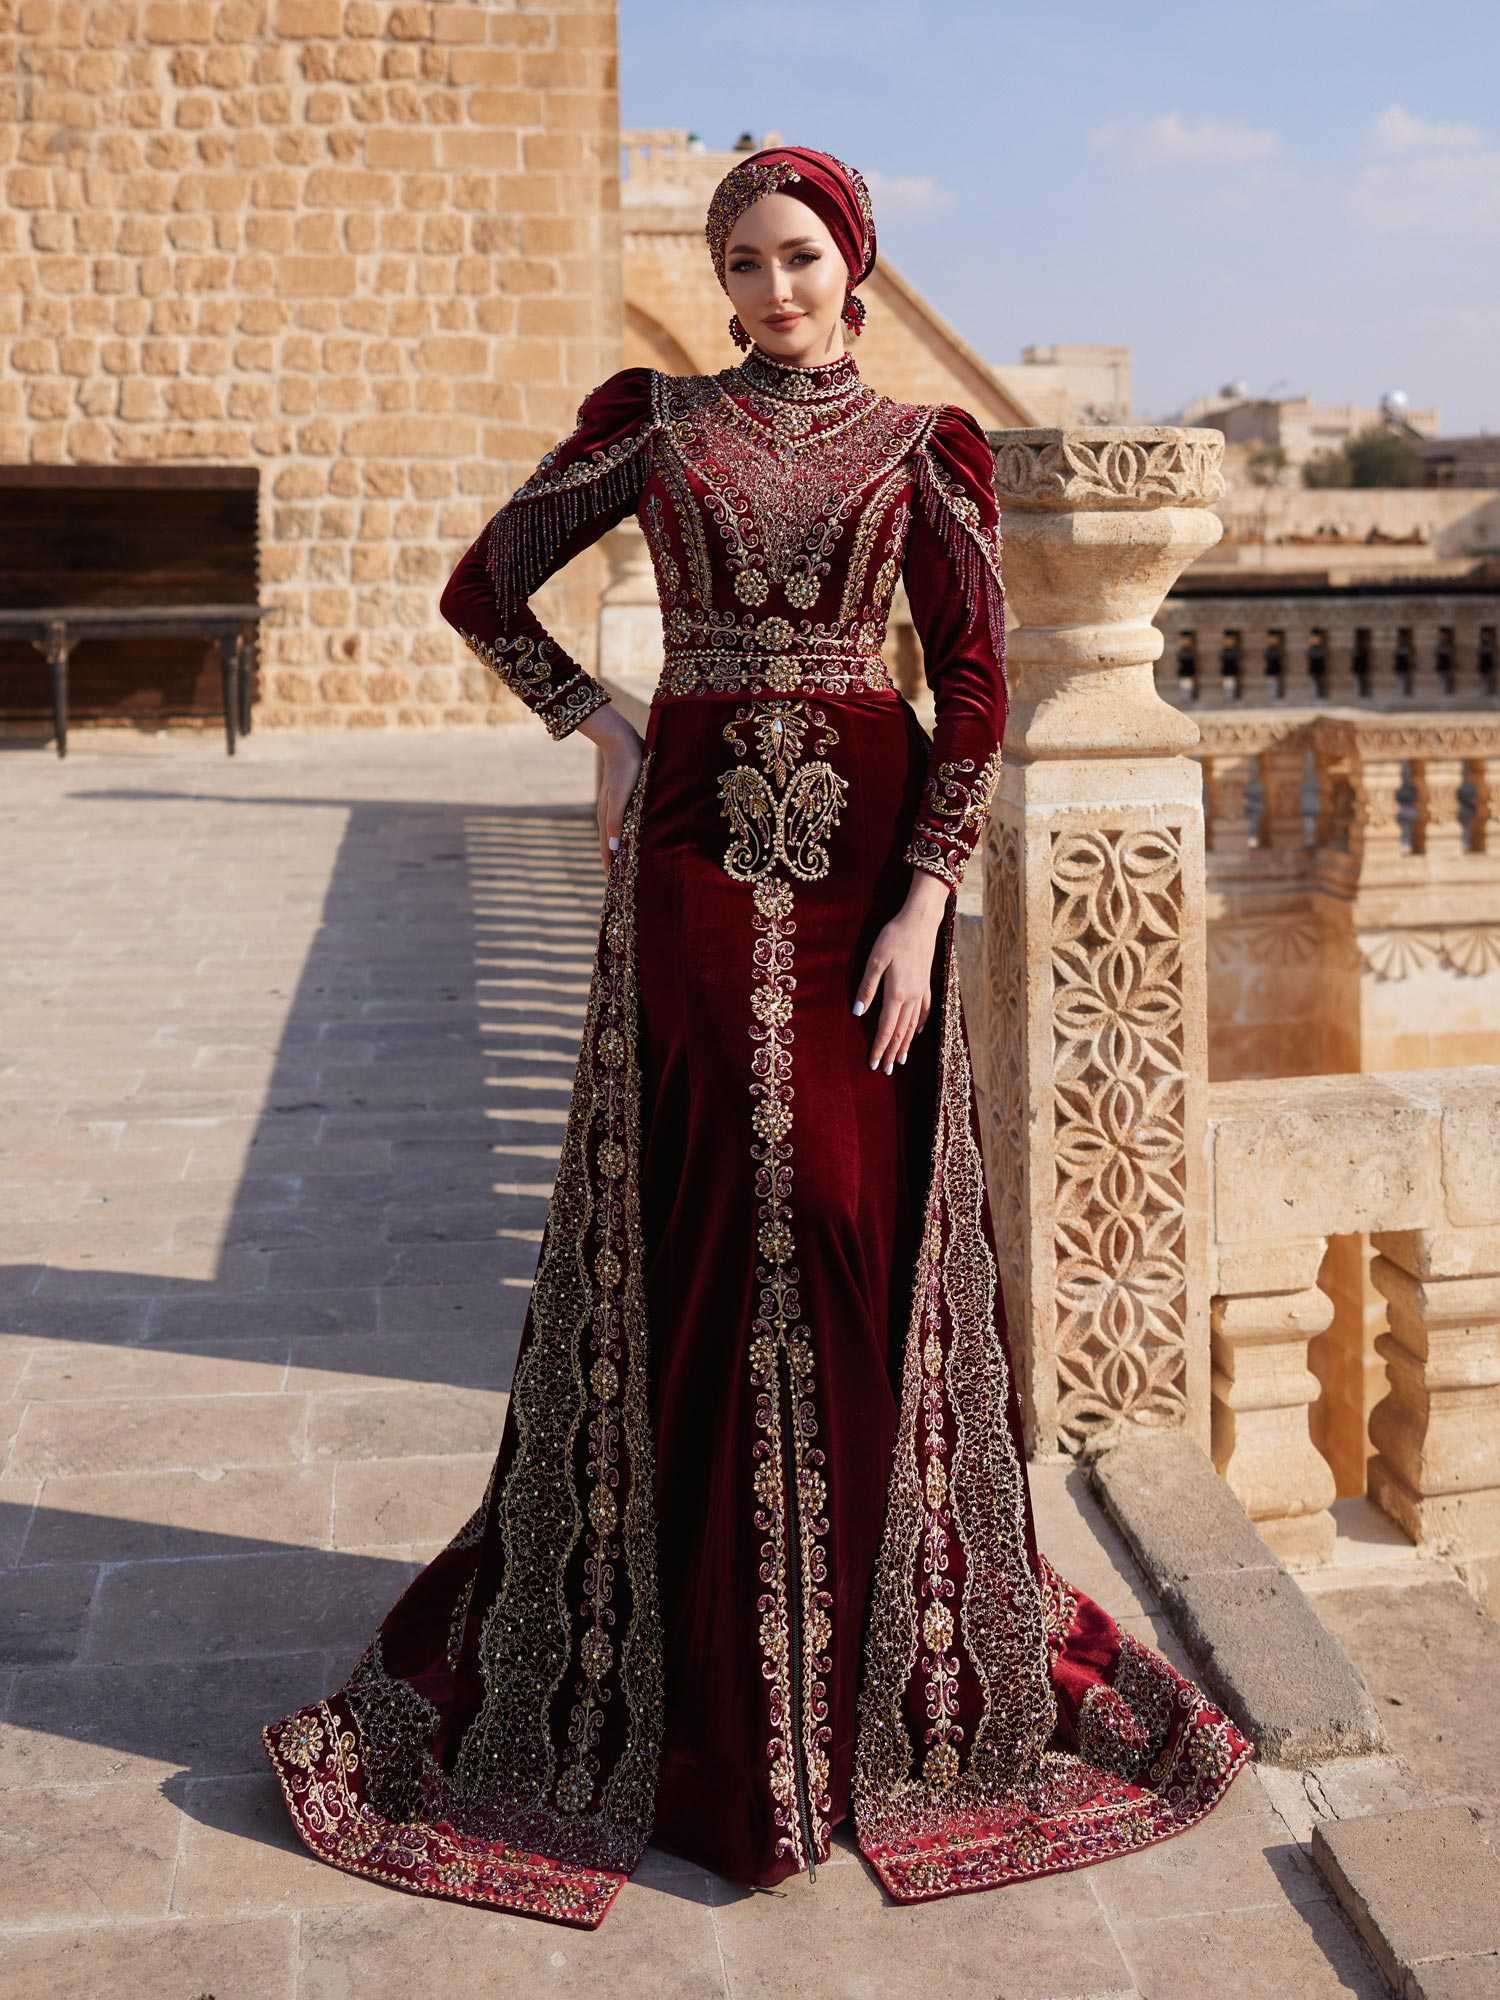 buy Luxury Gold Lace Applique Hand Embroidered Mermaid Model Velvet Muslim Hijab Evening Formal Party Dresses plus sizes glamorous henna dress with detachable train online henna gowns shop